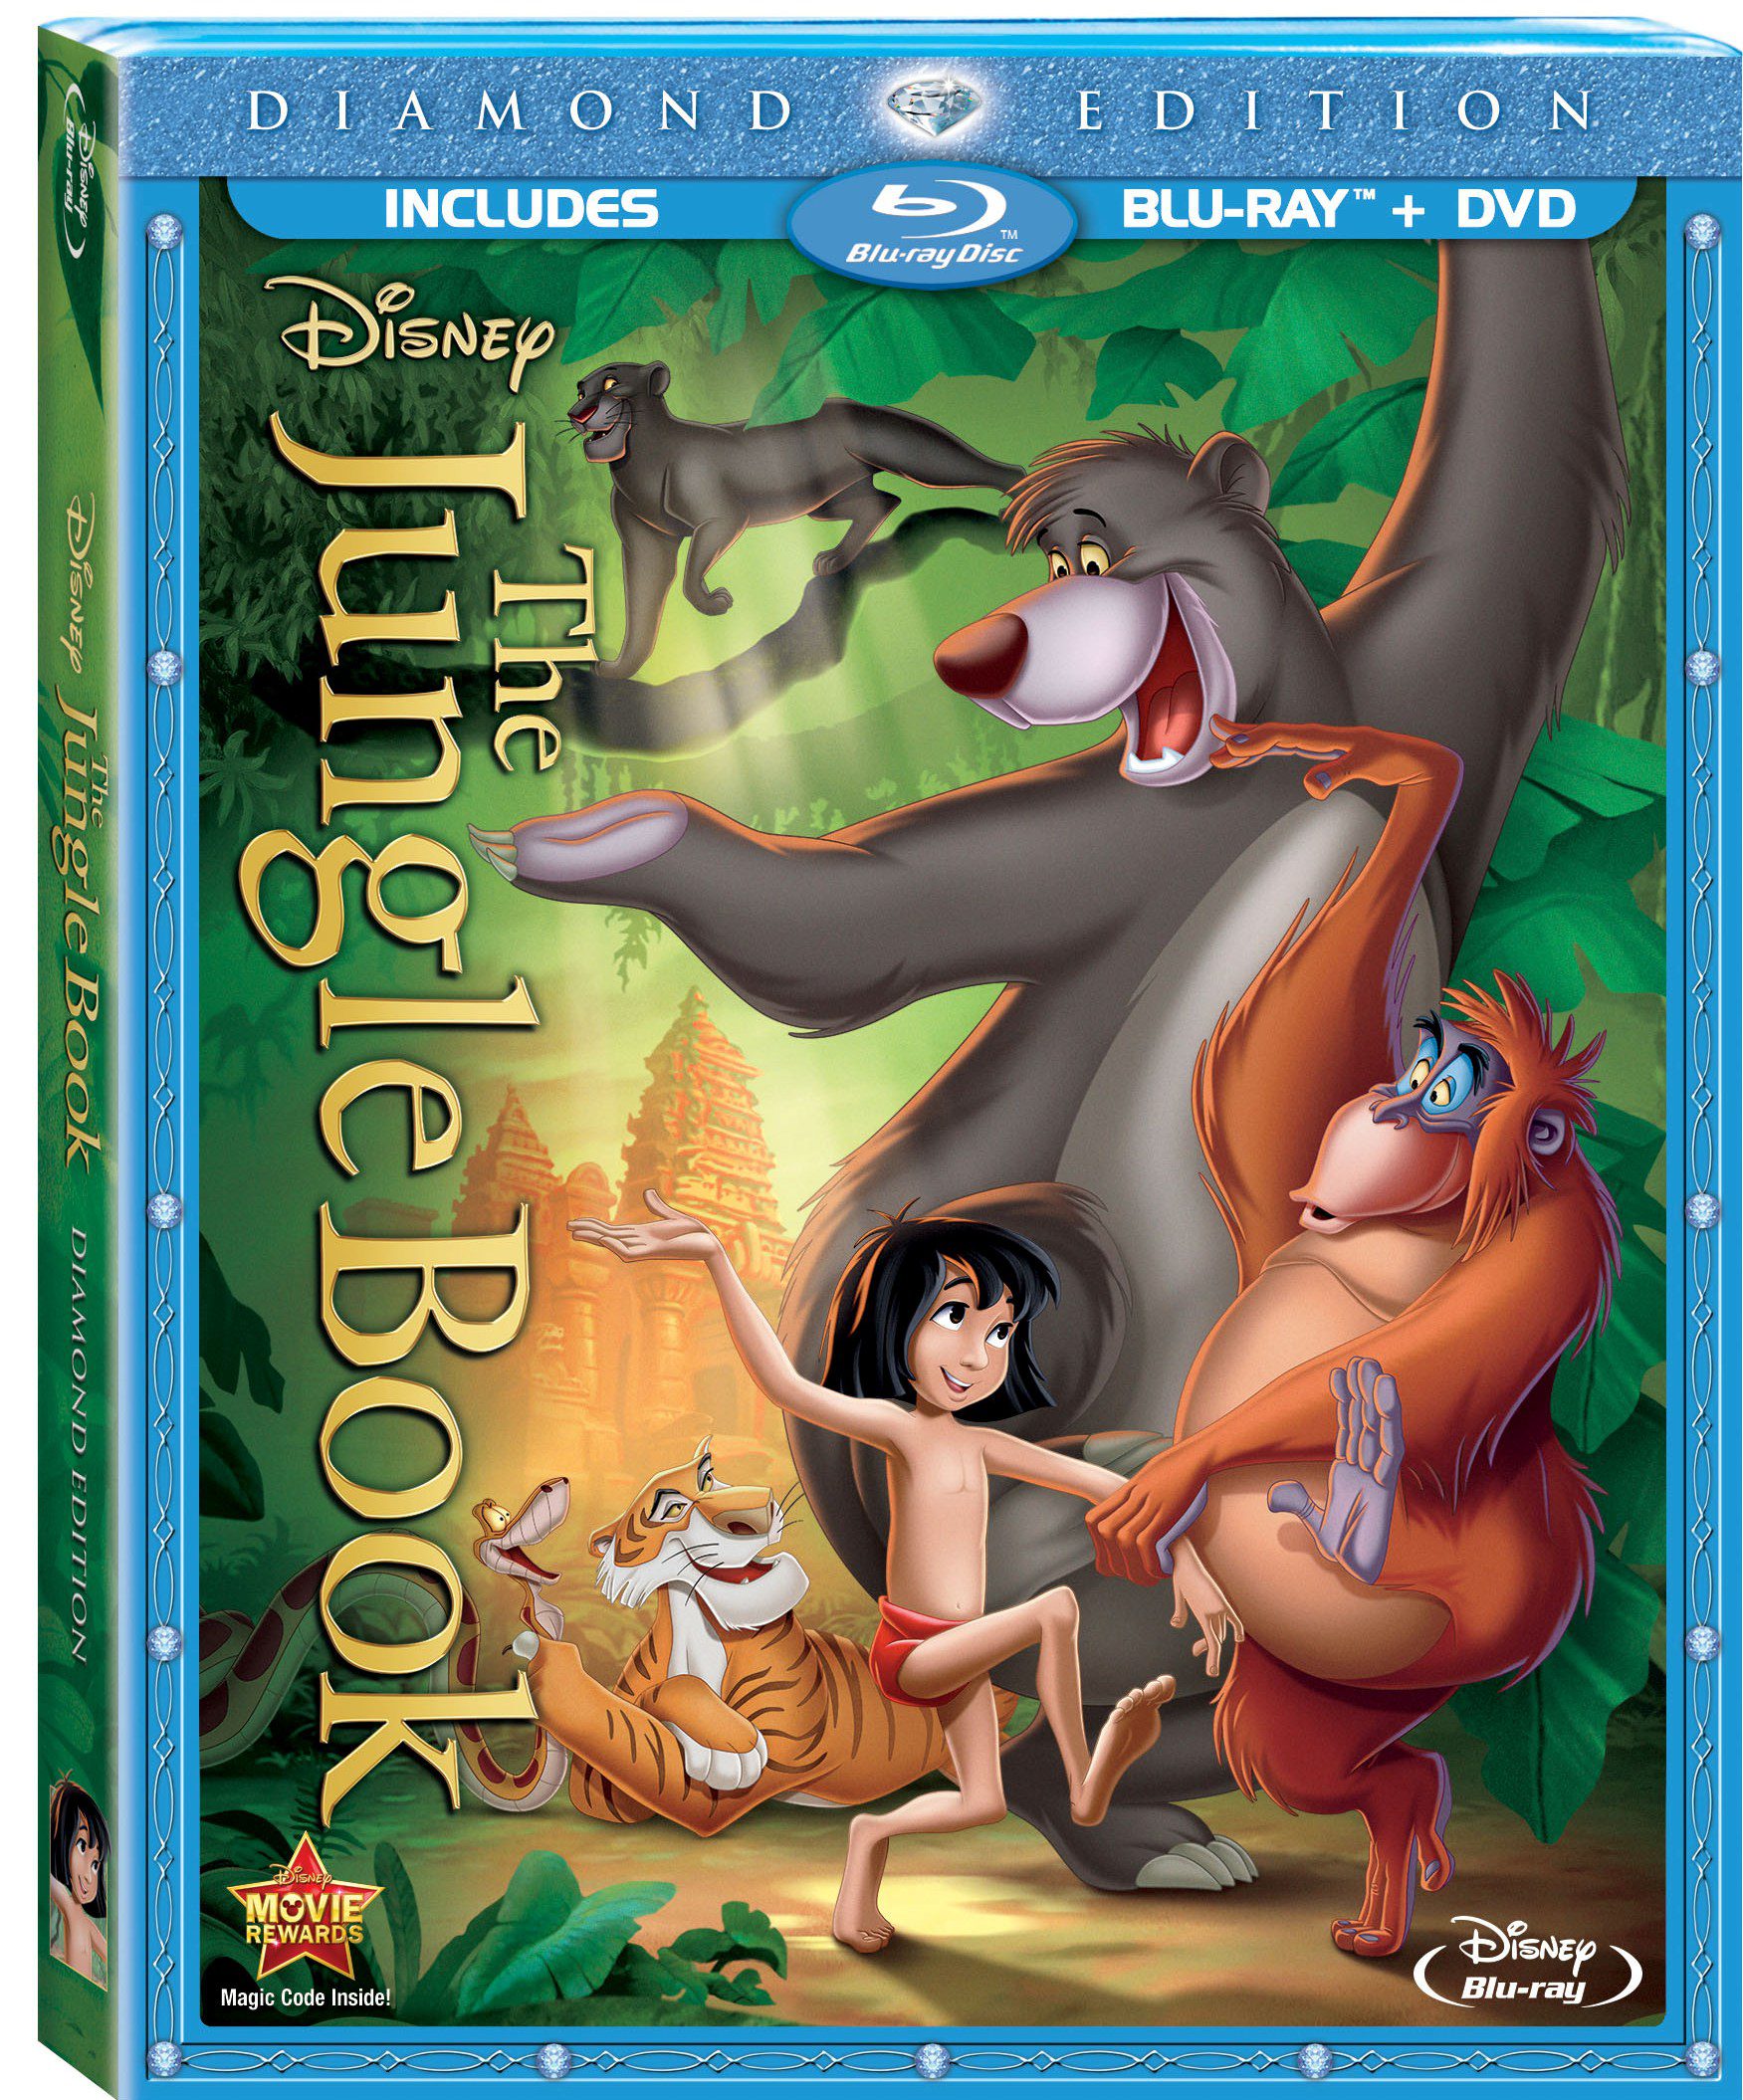 FREE Disney The Jungle Book Activity Sheets {and film clips}